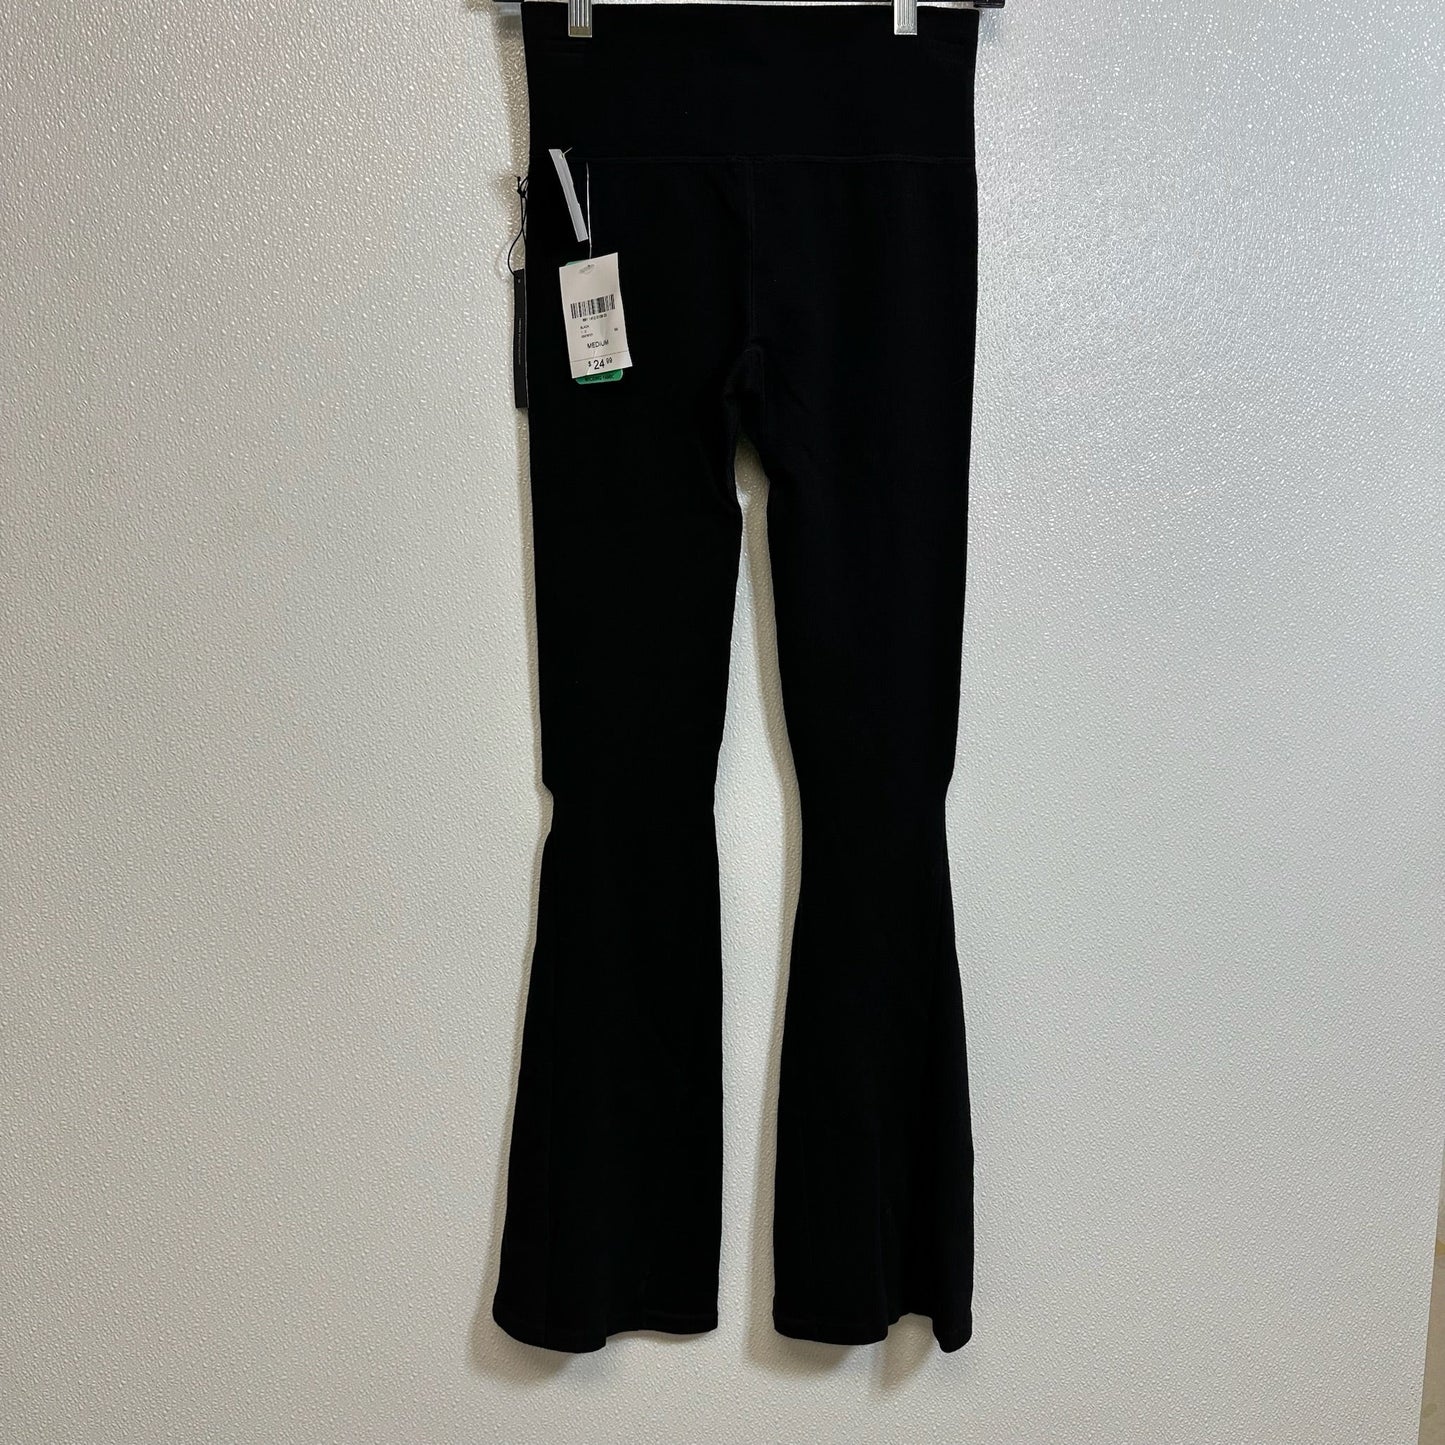 Leggings By Forever 21  Size: M